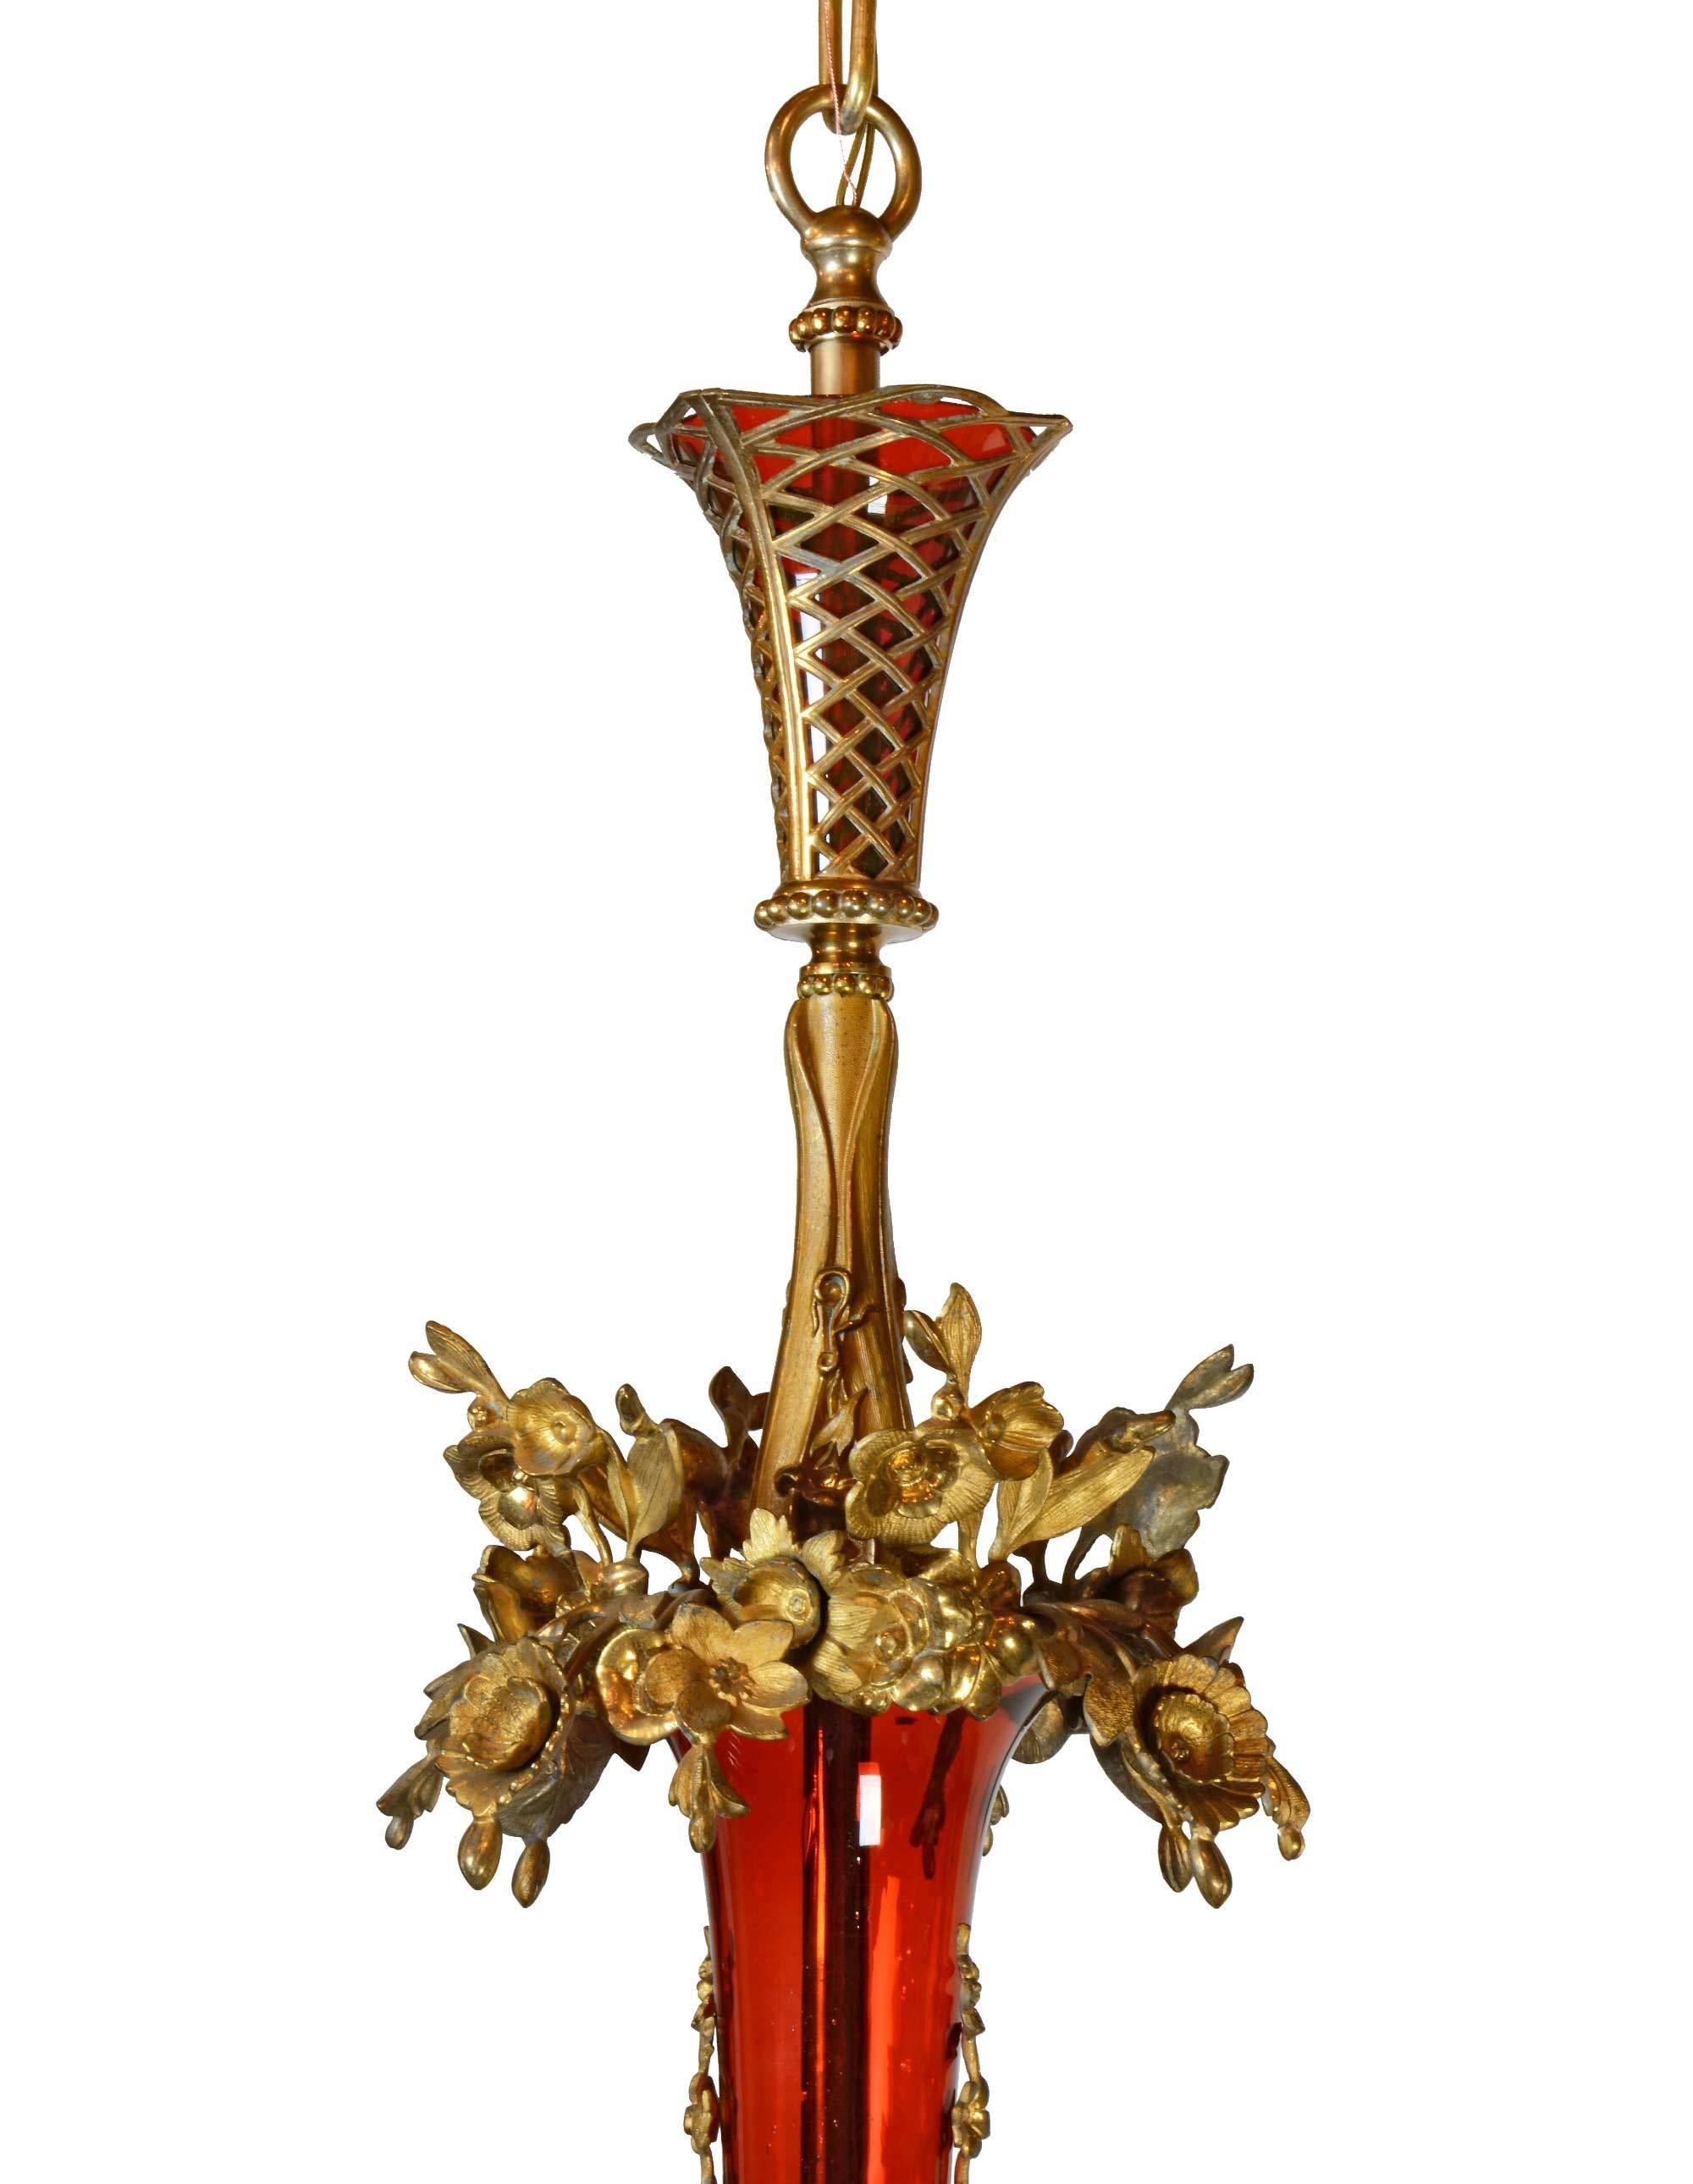 Ornate Brass and Cranberry Glass Converted Gas Fixture, circa 1880 For Sale 4